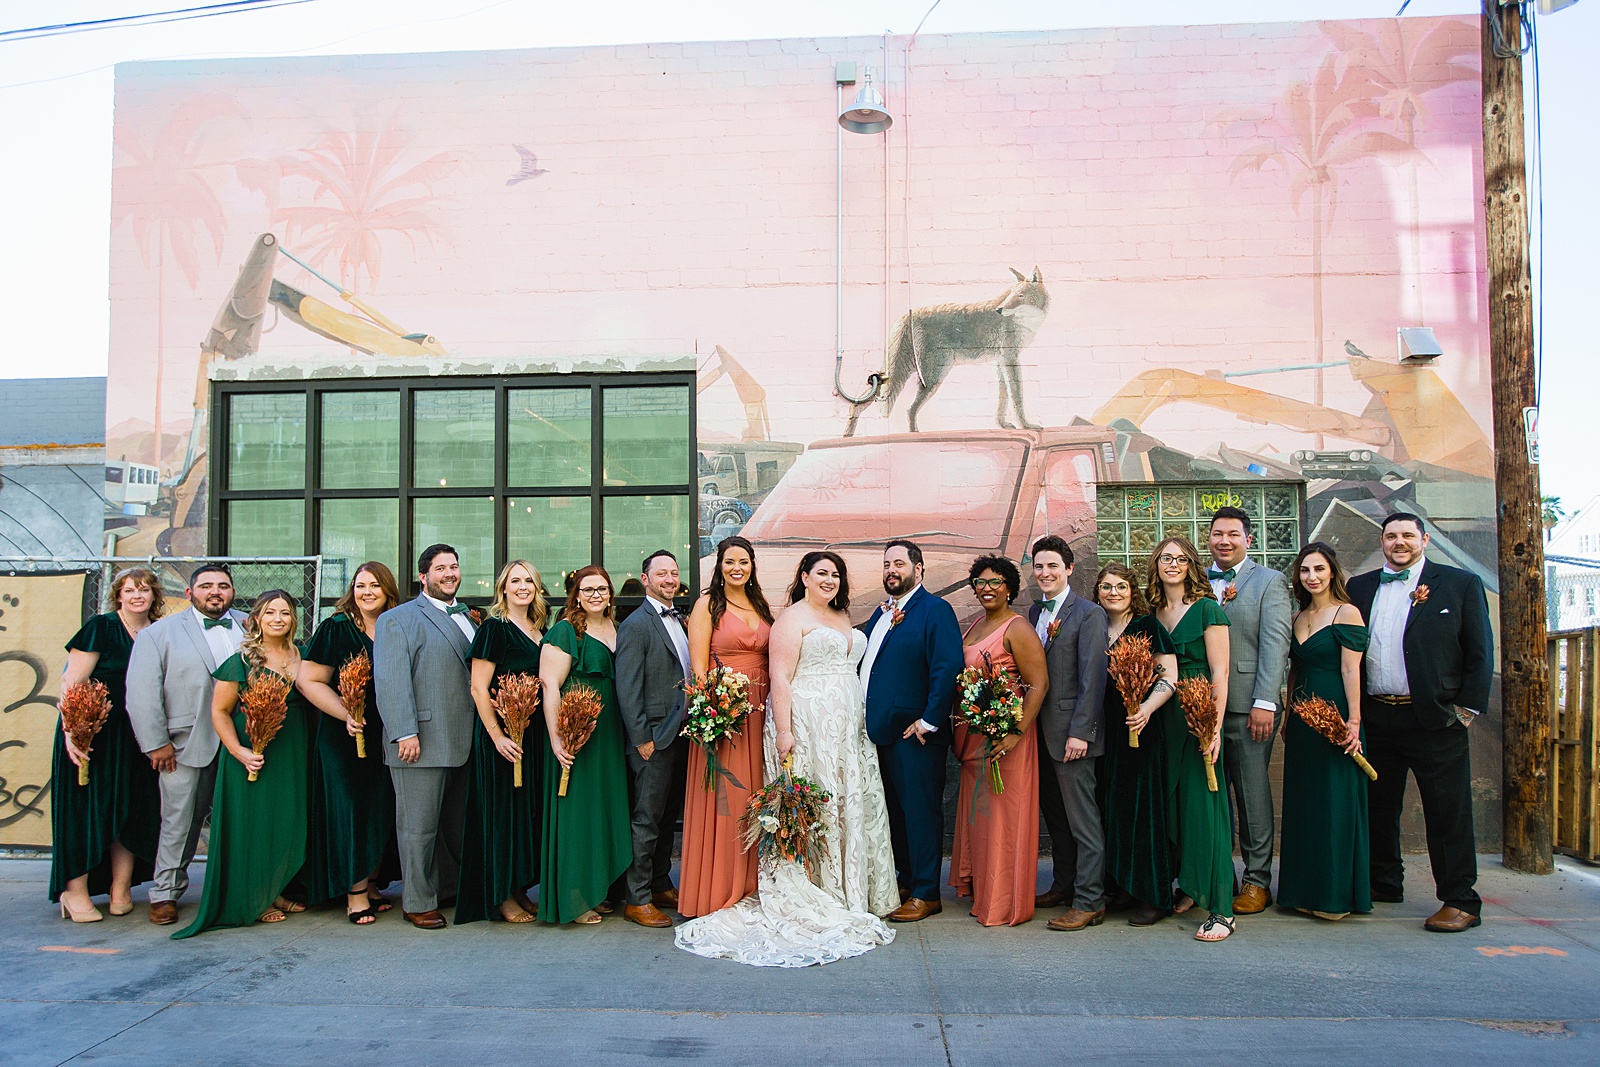 Bridal party together at a MonOrchid wedding by Arizona wedding photographer PMA Photography.